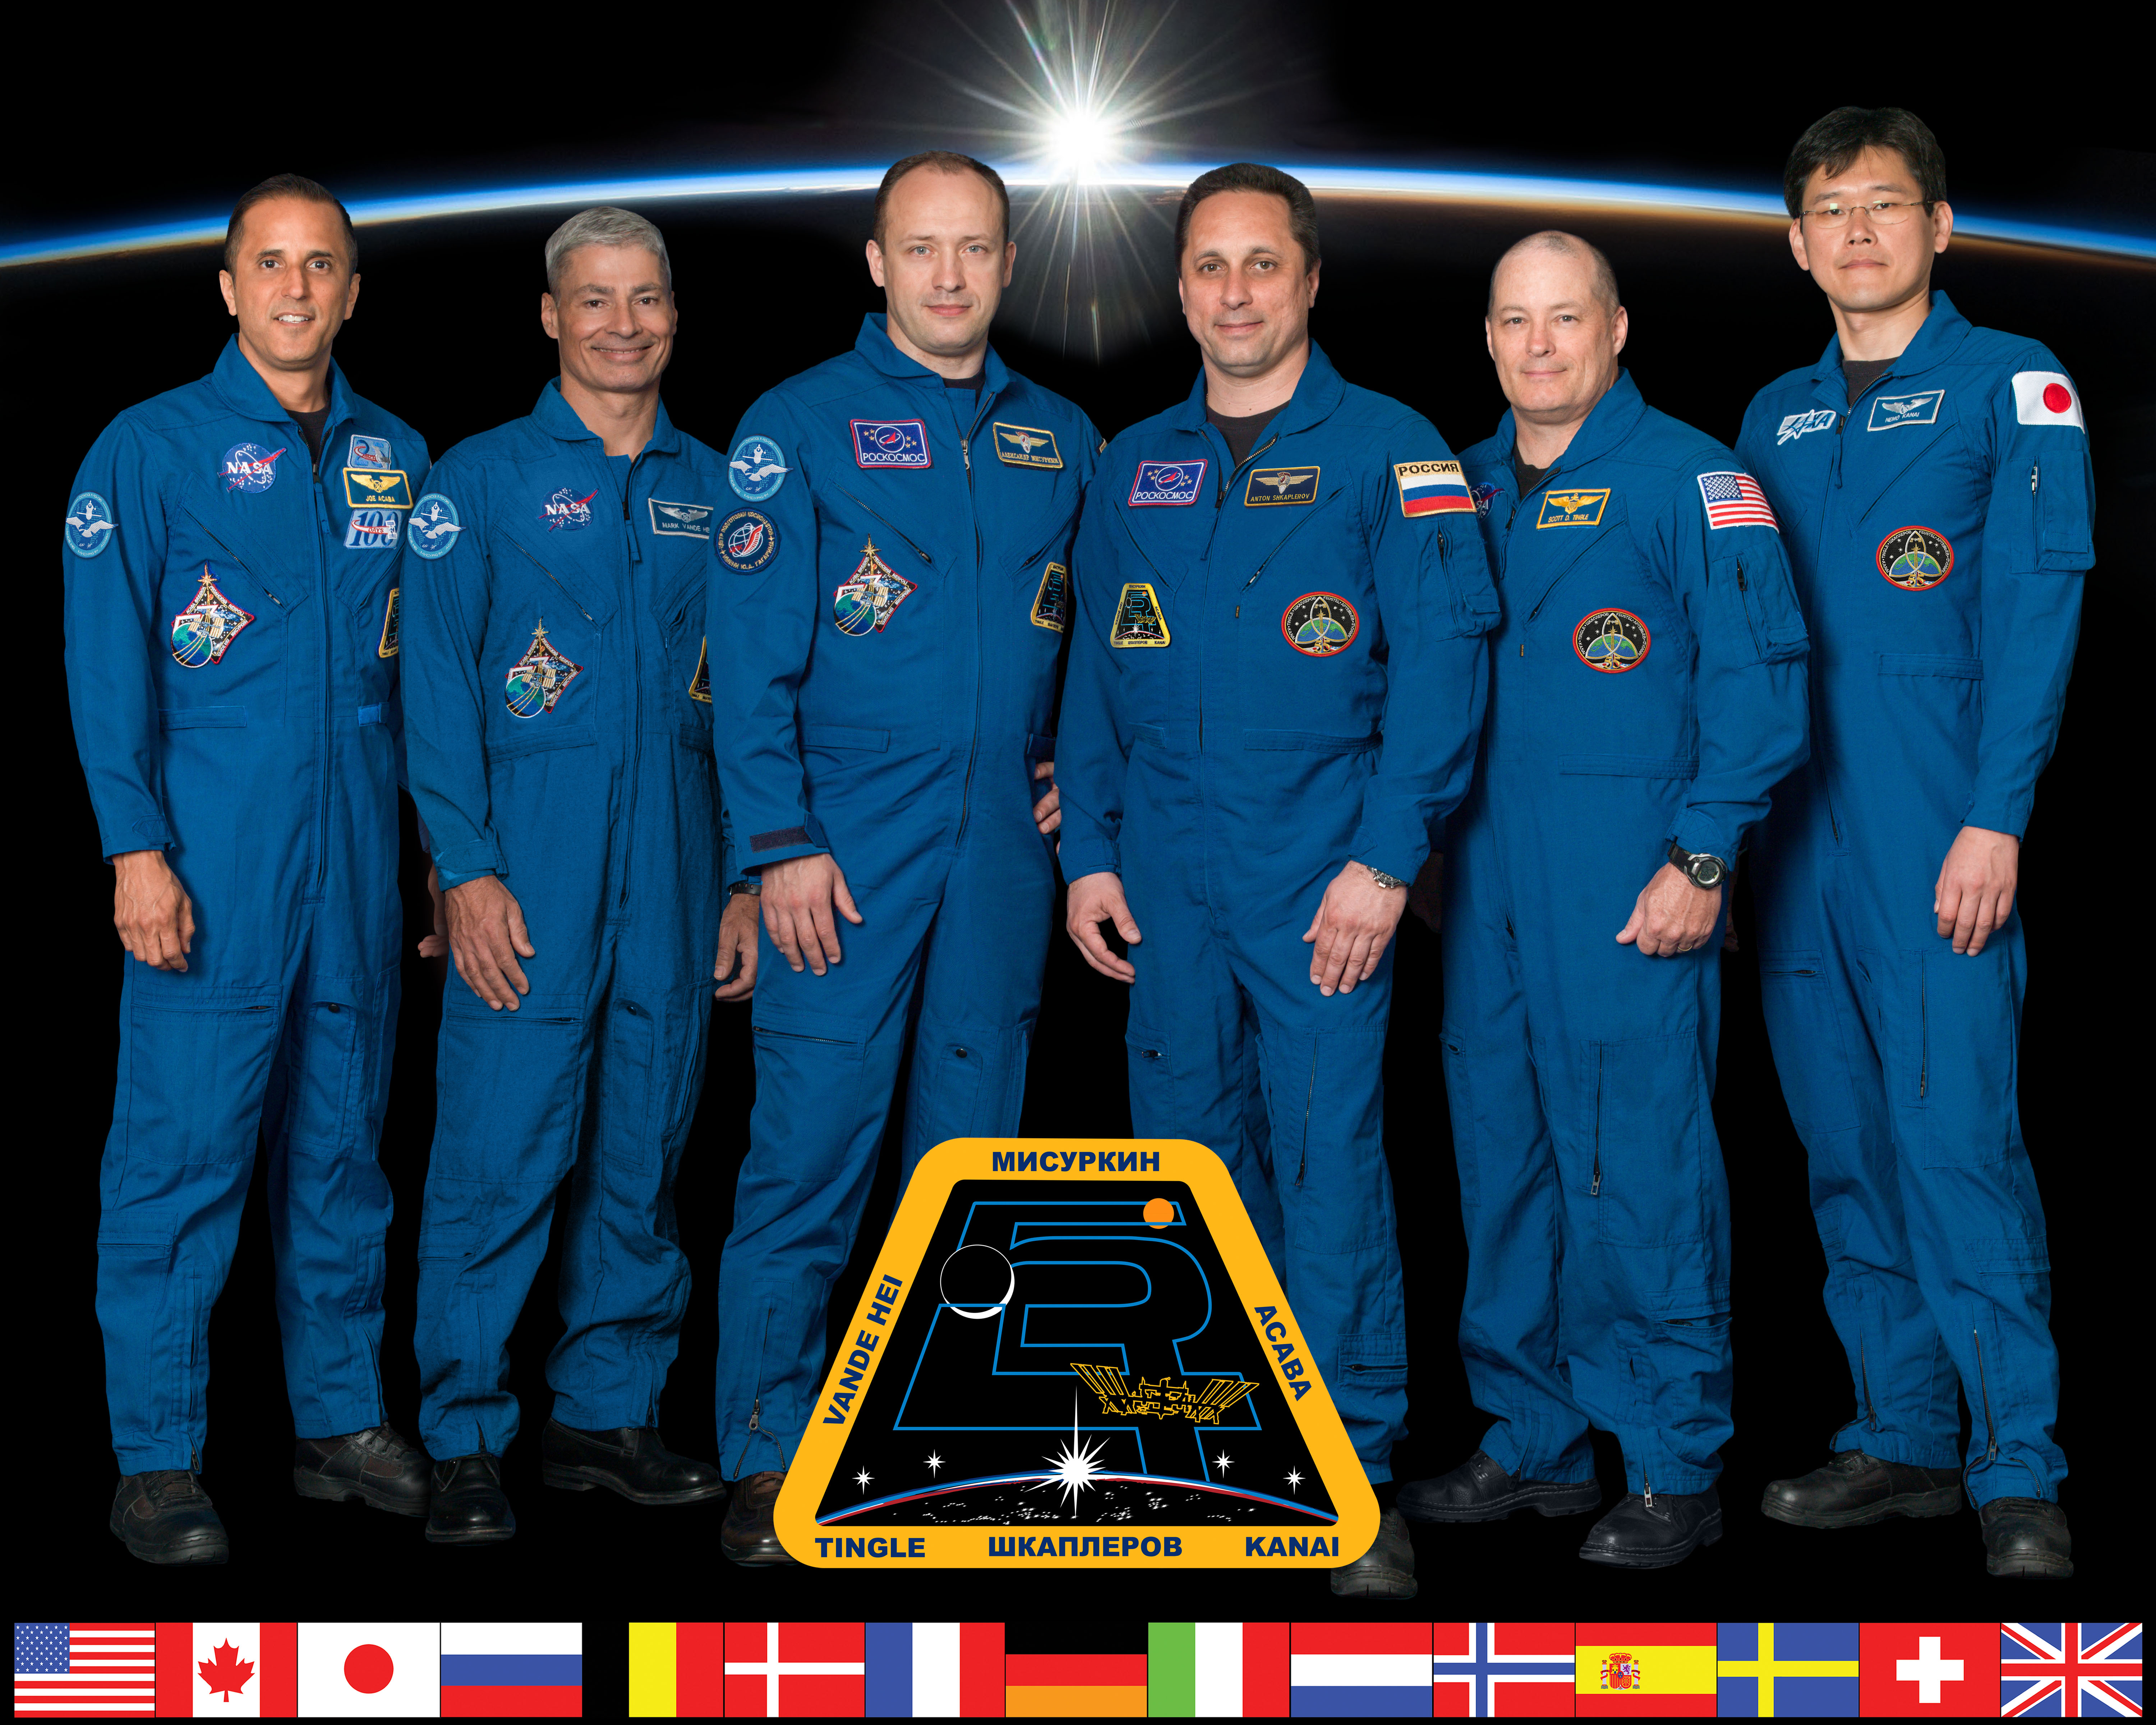 Expedition 54 Official Crew Portrait